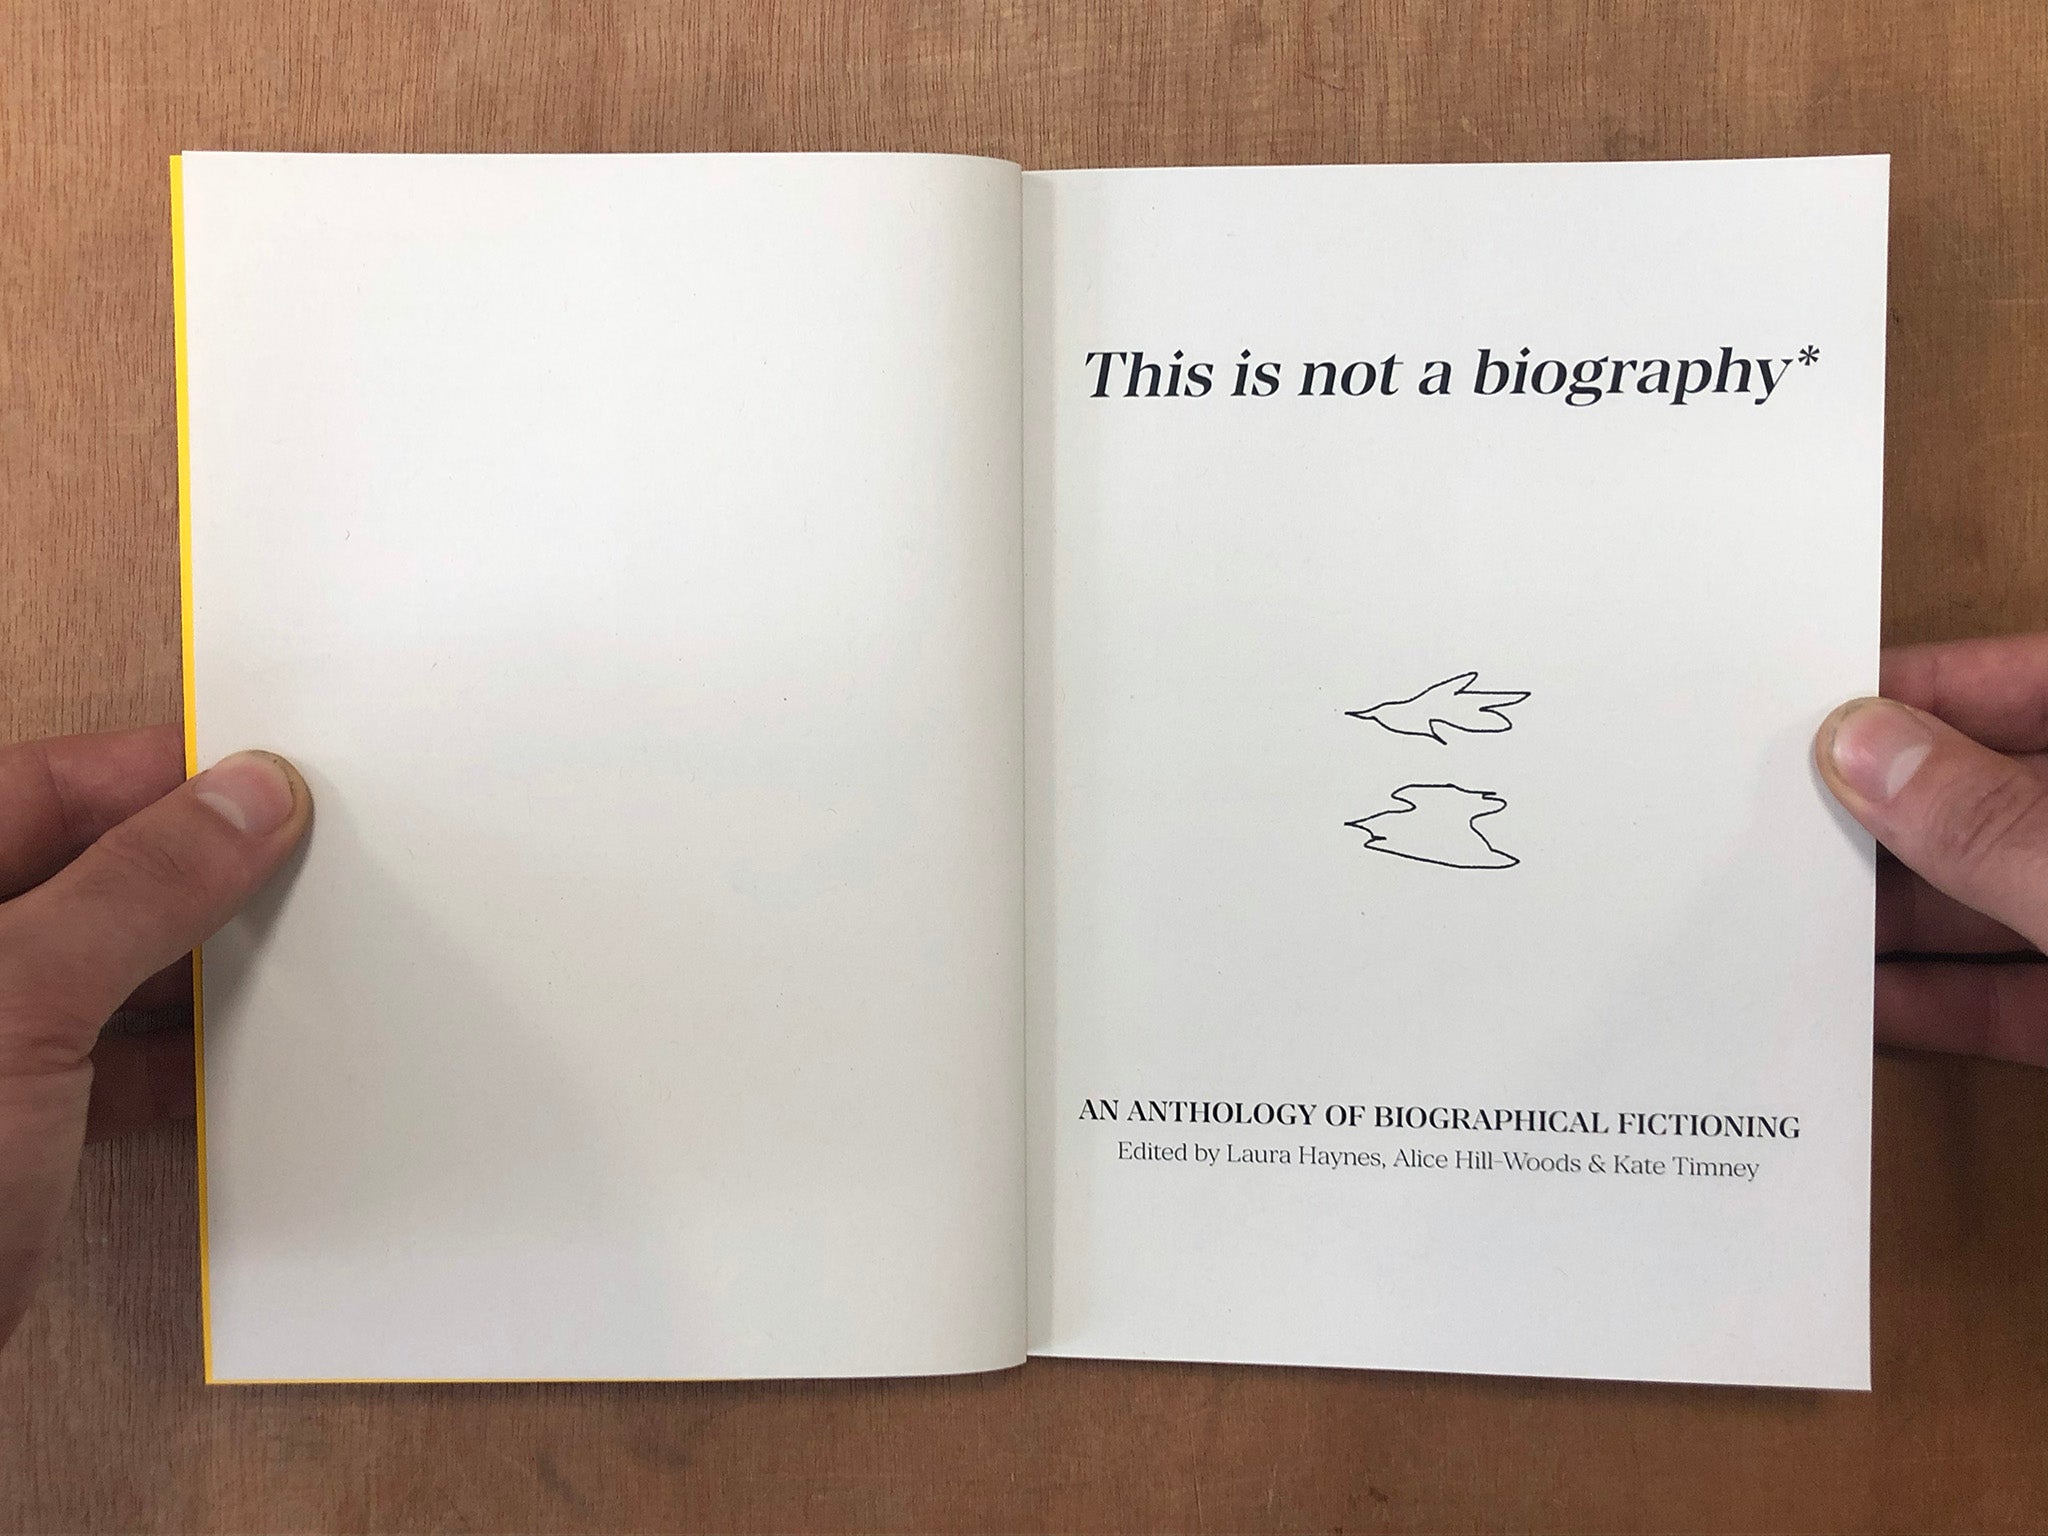 THIS IS NOT A BIOGRAPHY* ed. Laura Haynes, Alice Hill-Woods and Kate Timney